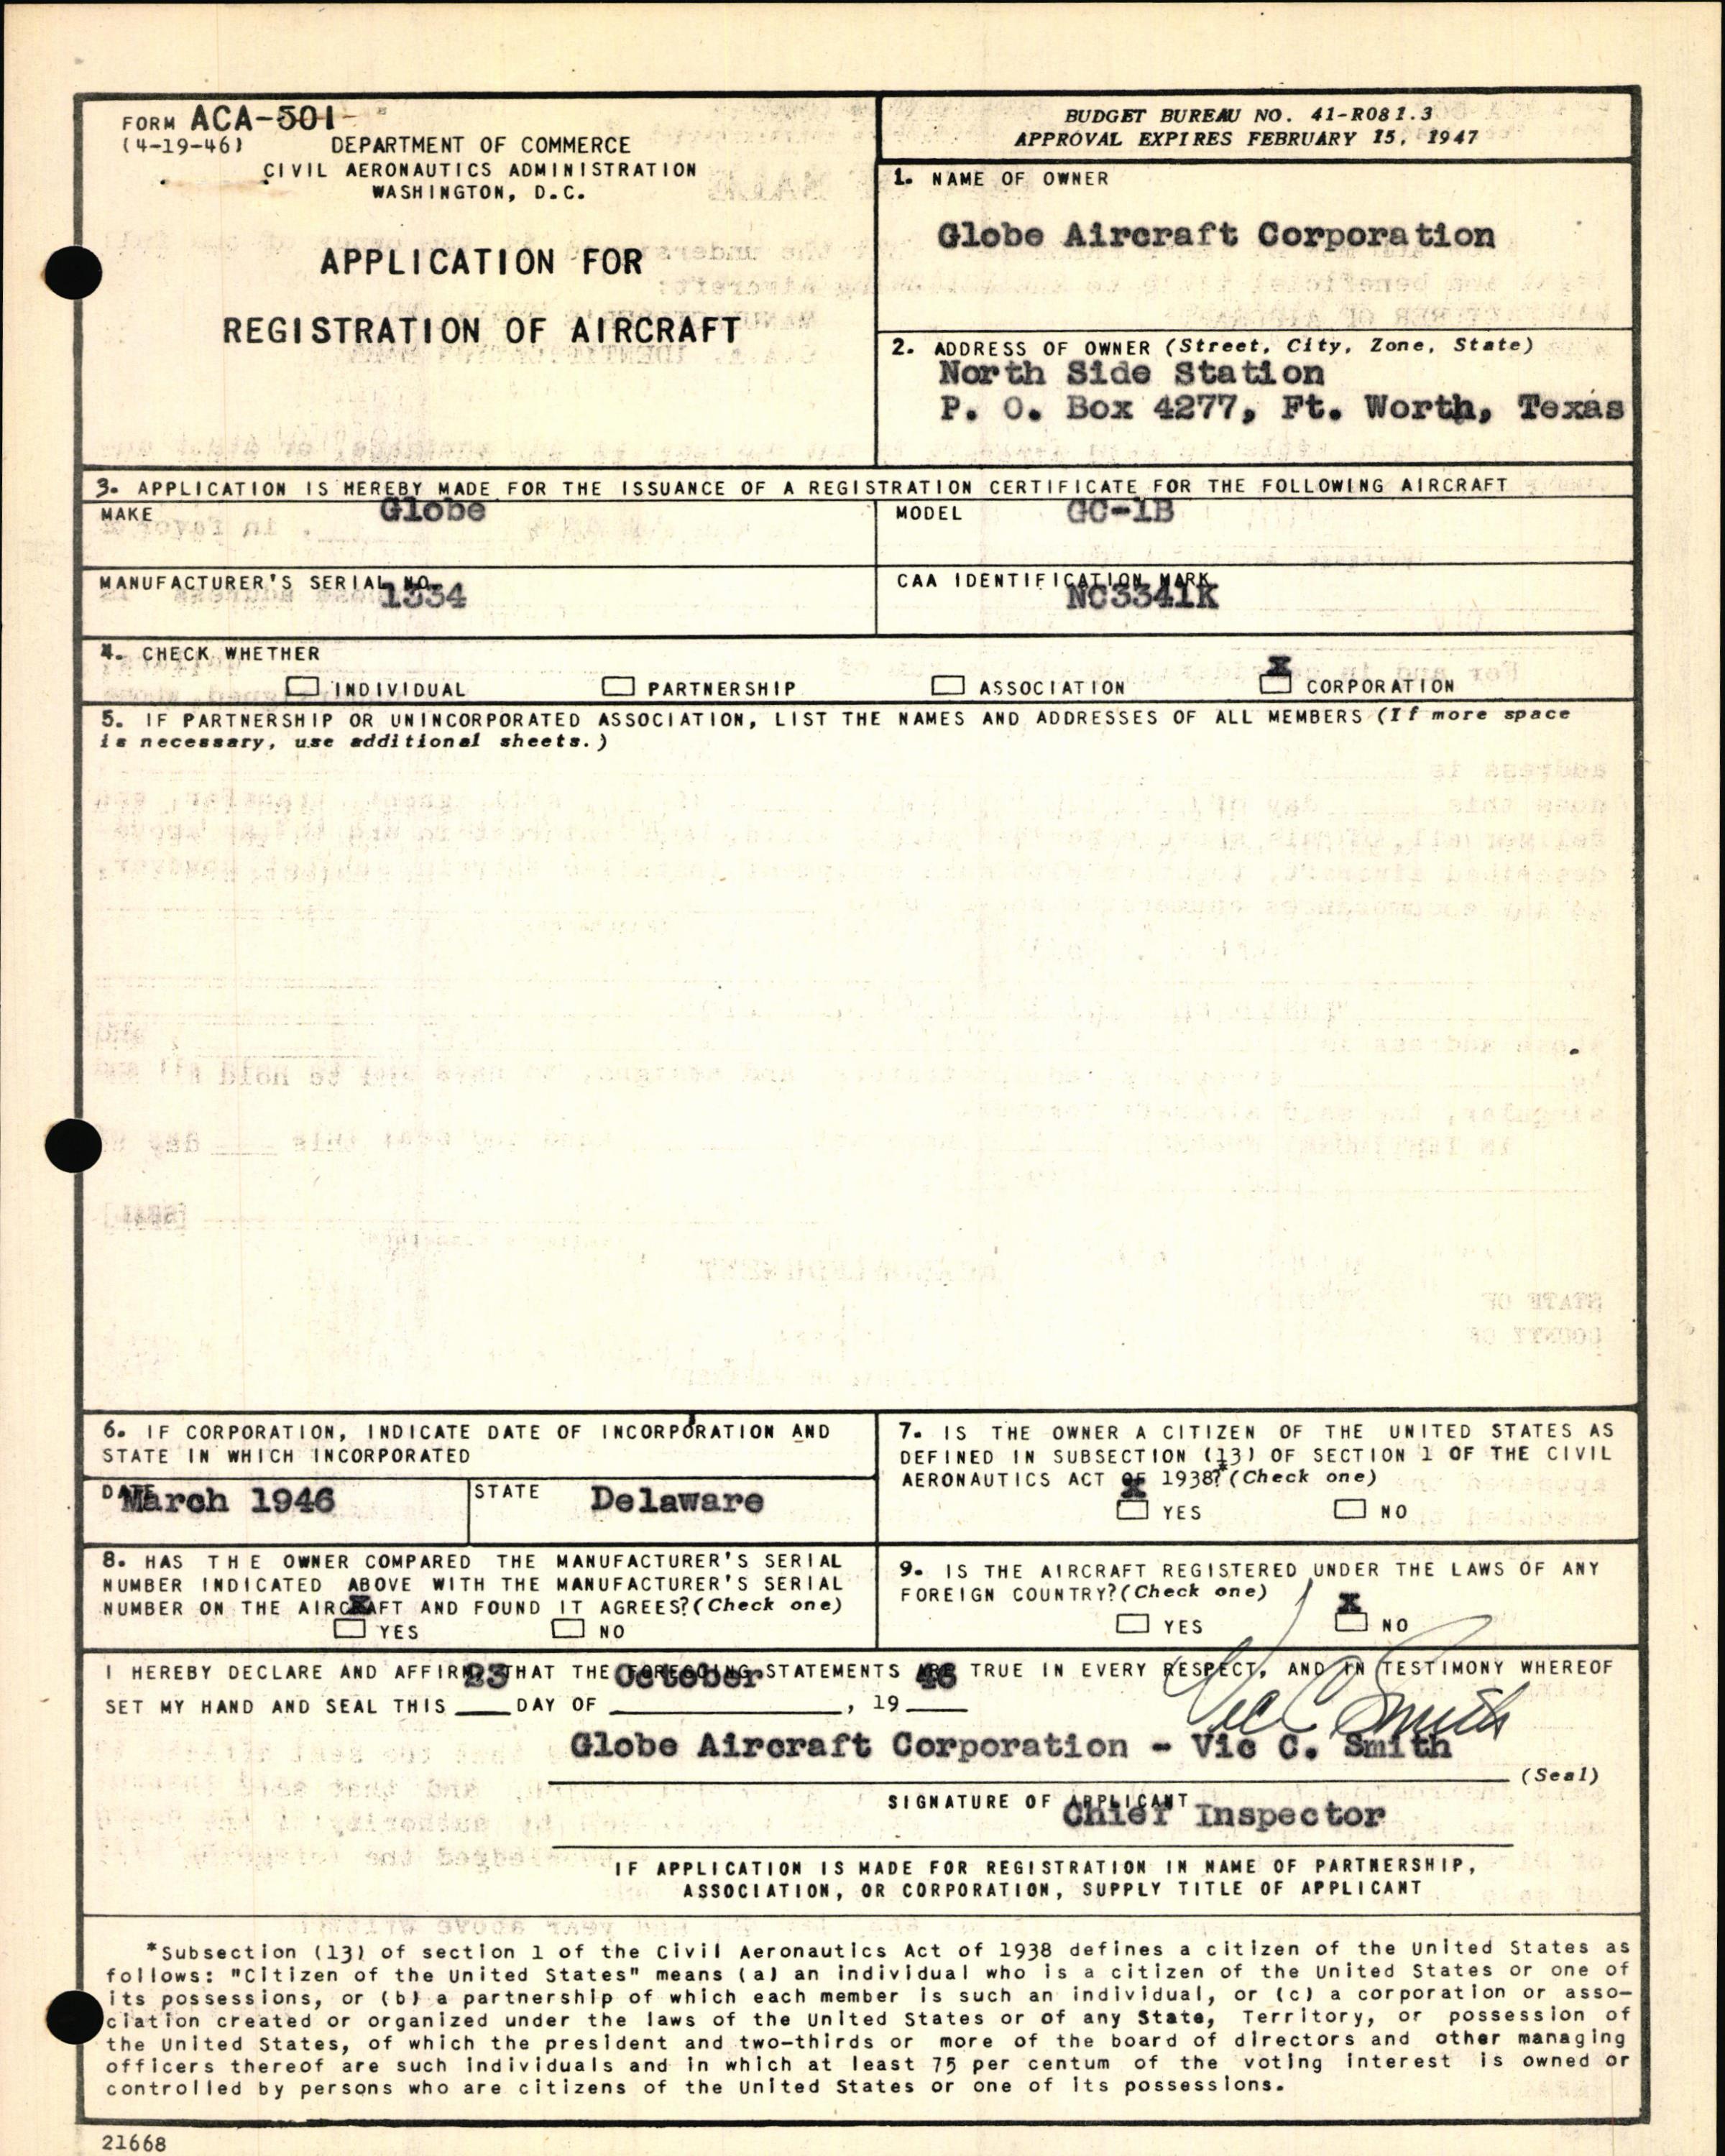 Sample page 3 from AirCorps Library document: Technical Information for Serial Number 1334